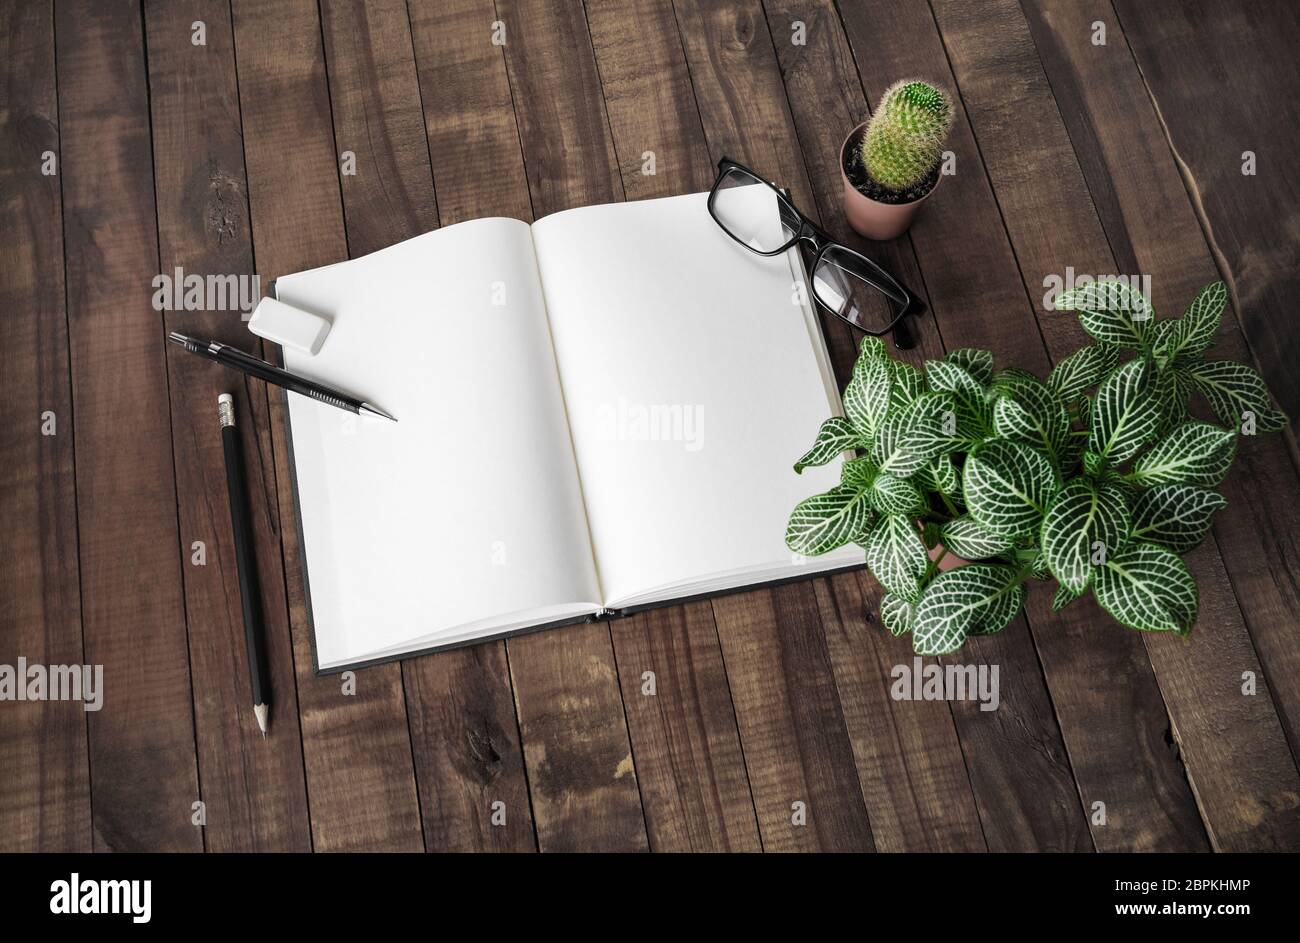 Blank book, stationery and plants on wooden background. Responsive design mock up. Stock Photo